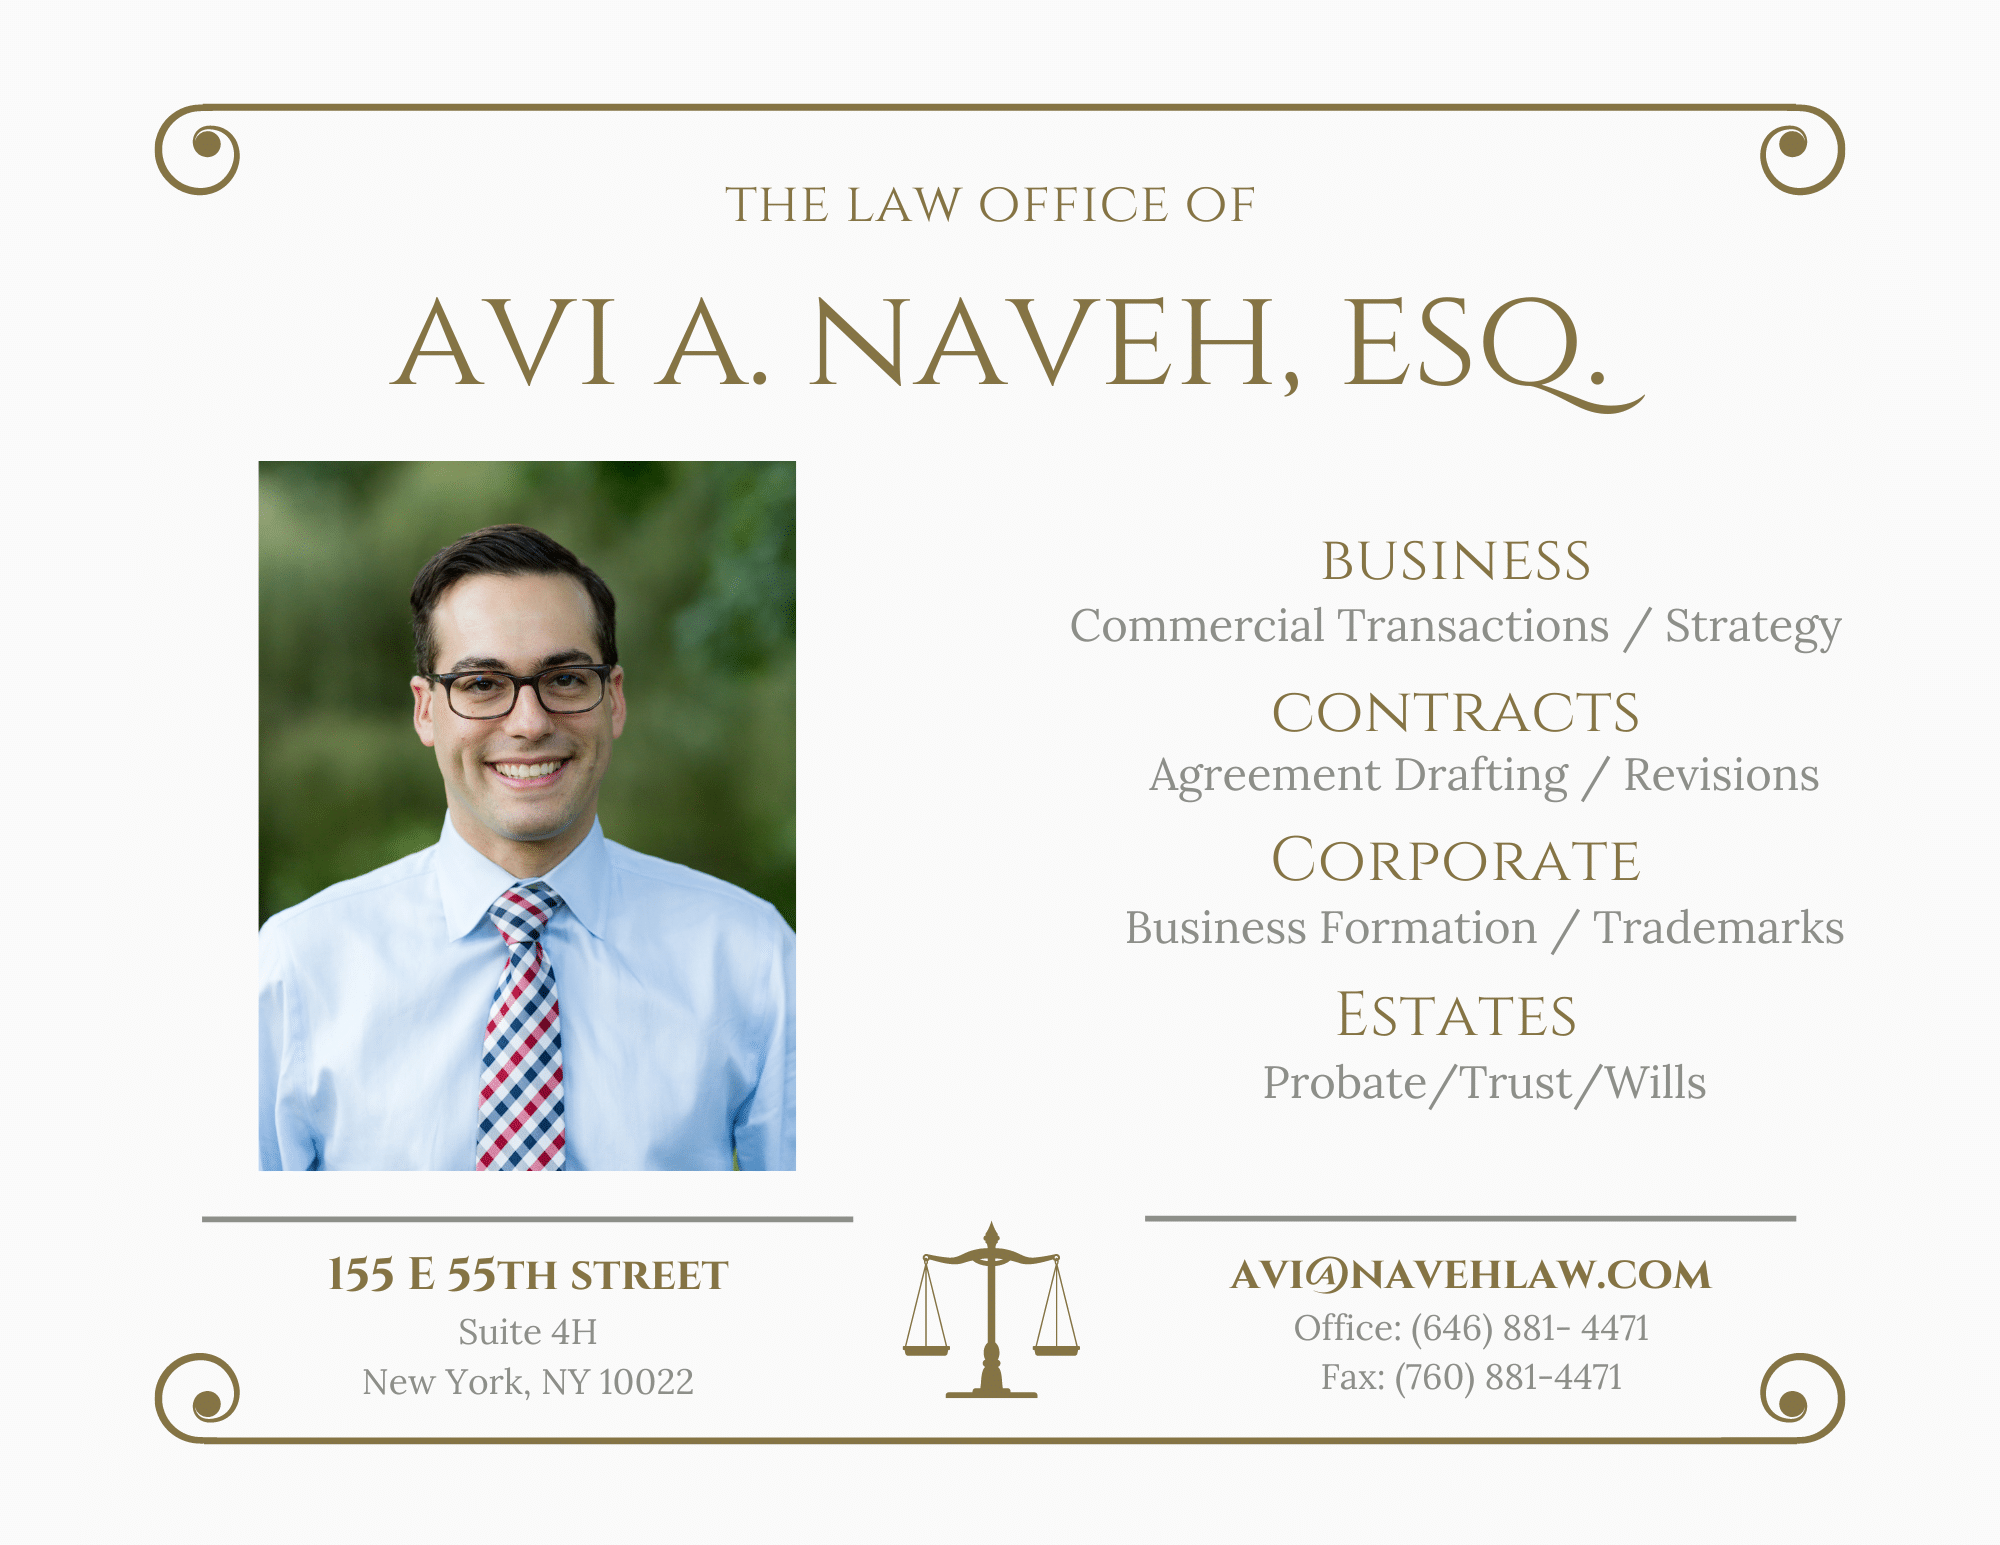 The Law Office of Avi A. Naveh Esq. To reach us please call (646) 881-4471.